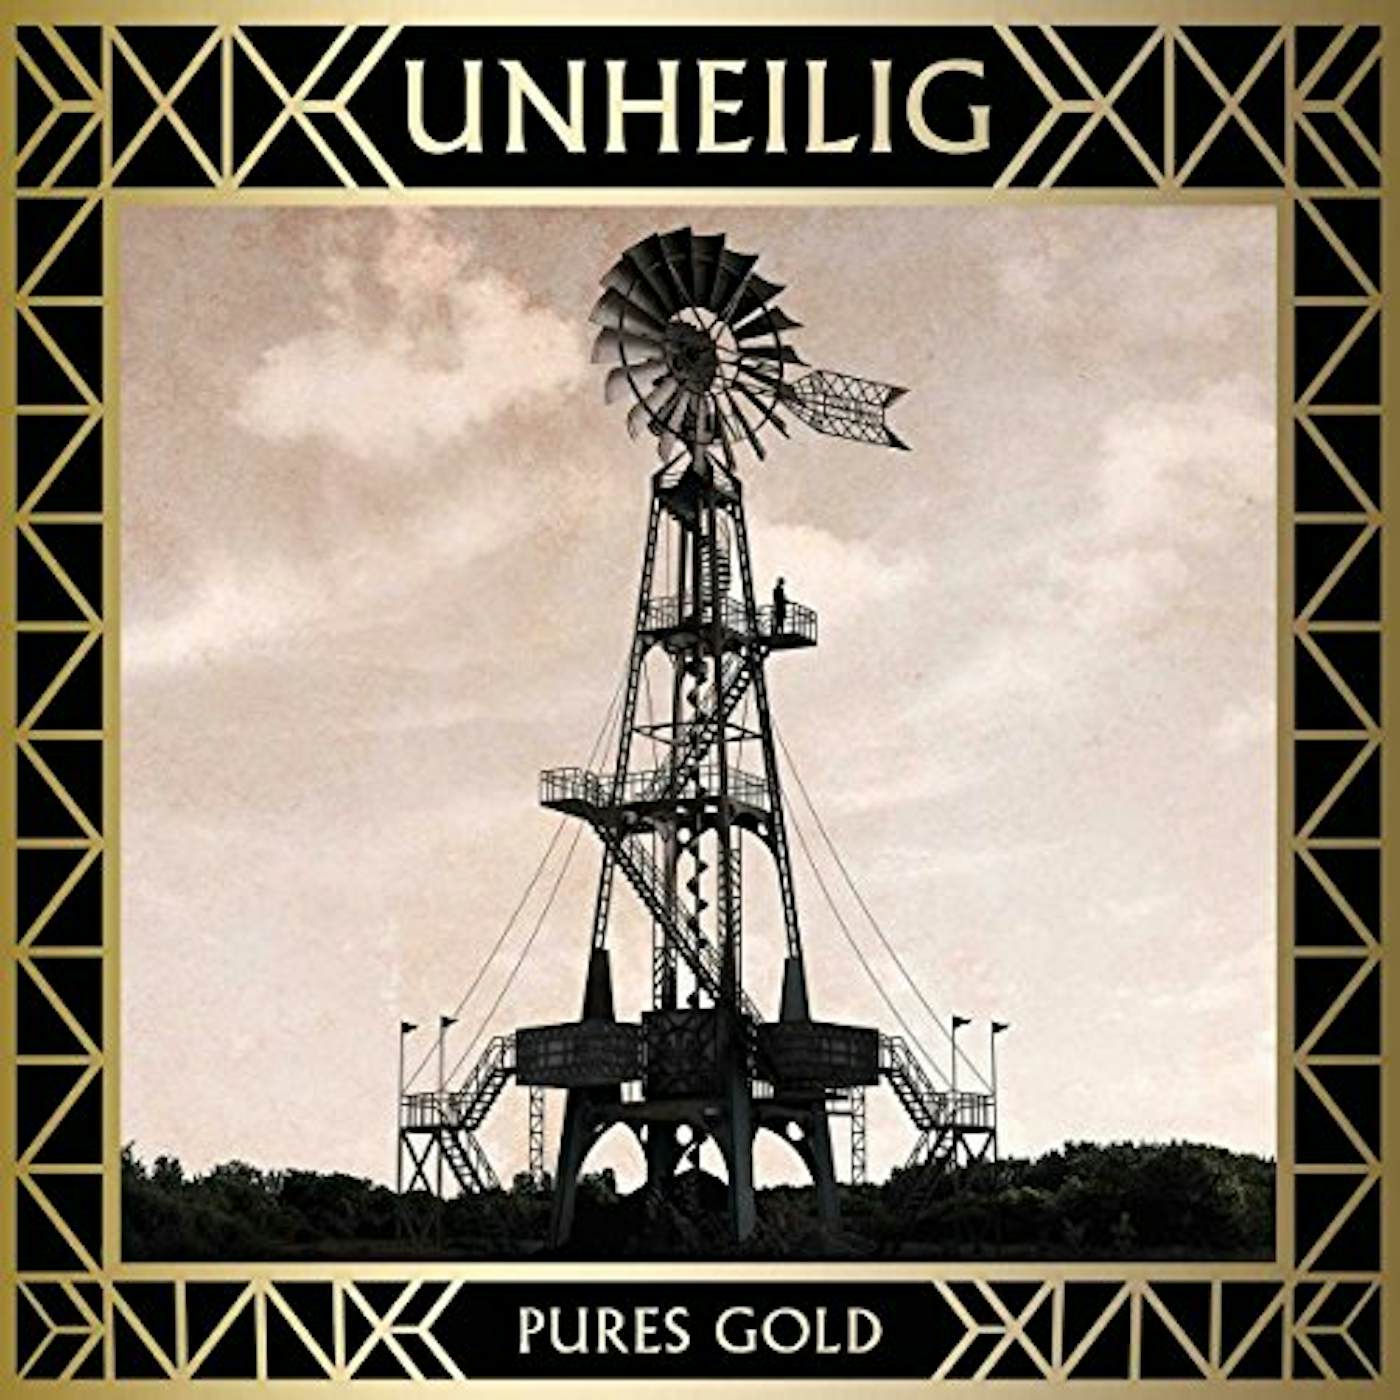 Unheilig BEST OF 2: PURES GOLD CD